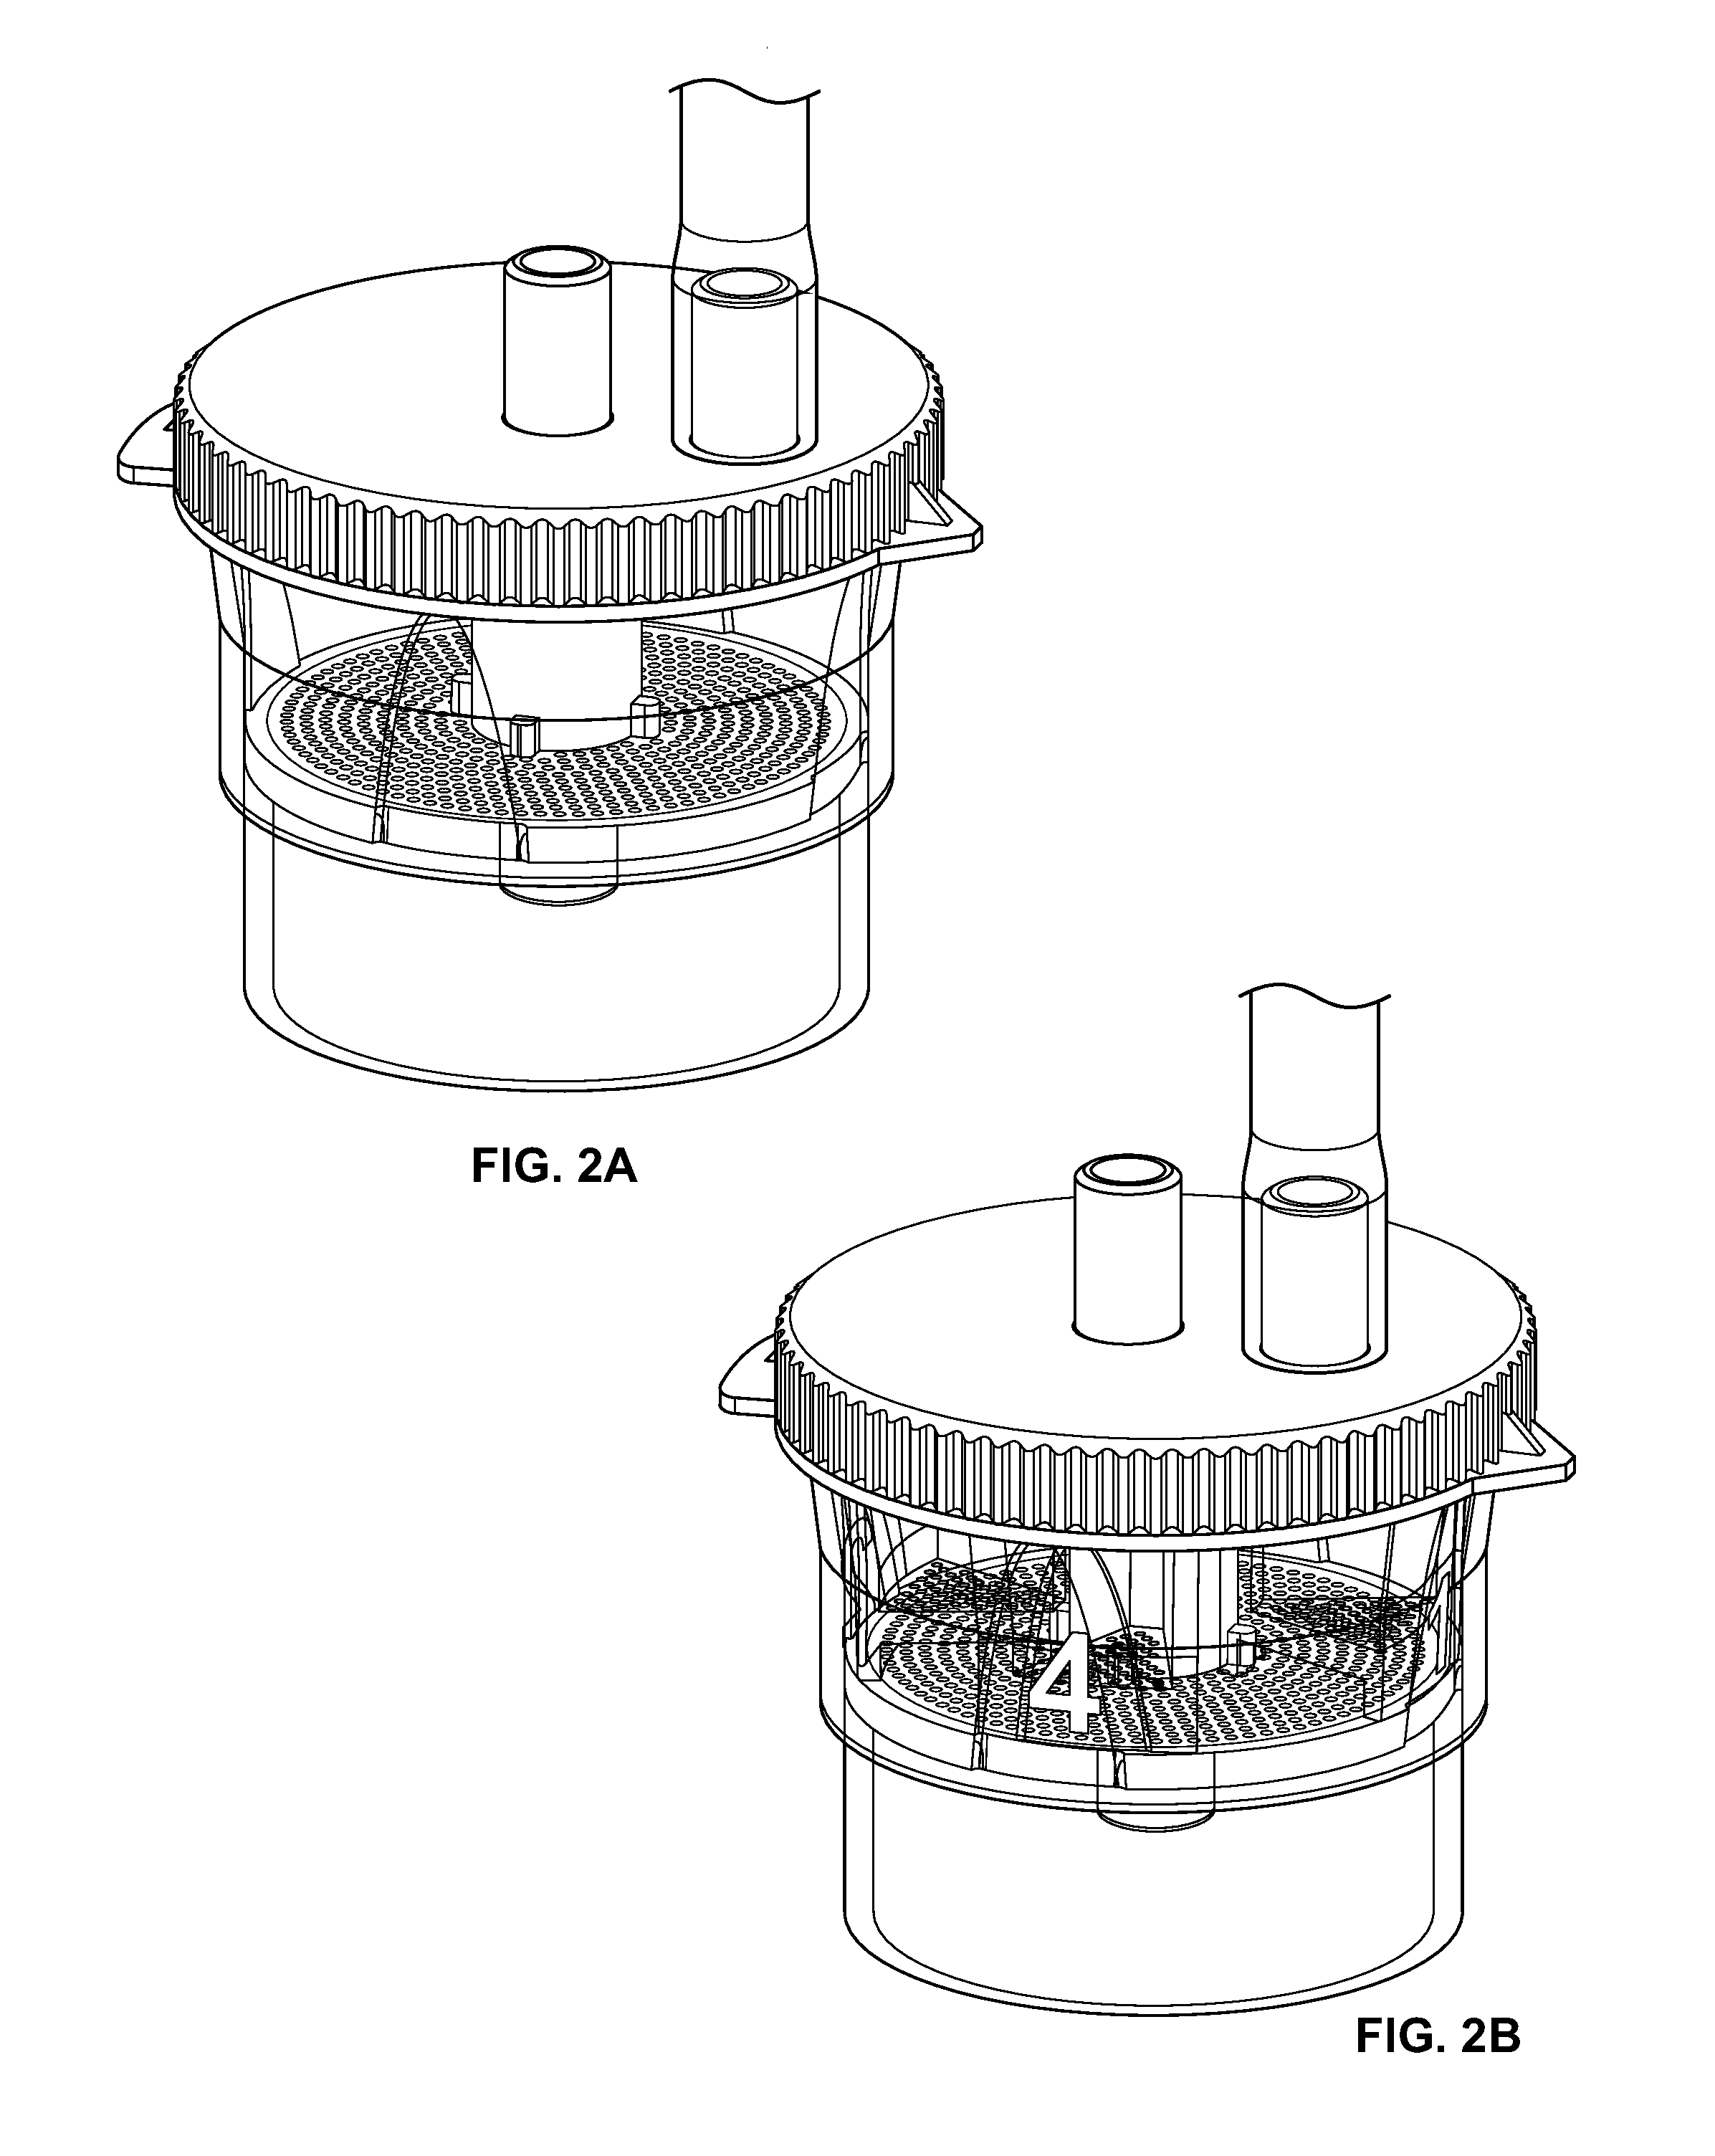 Tissue collection and separation device